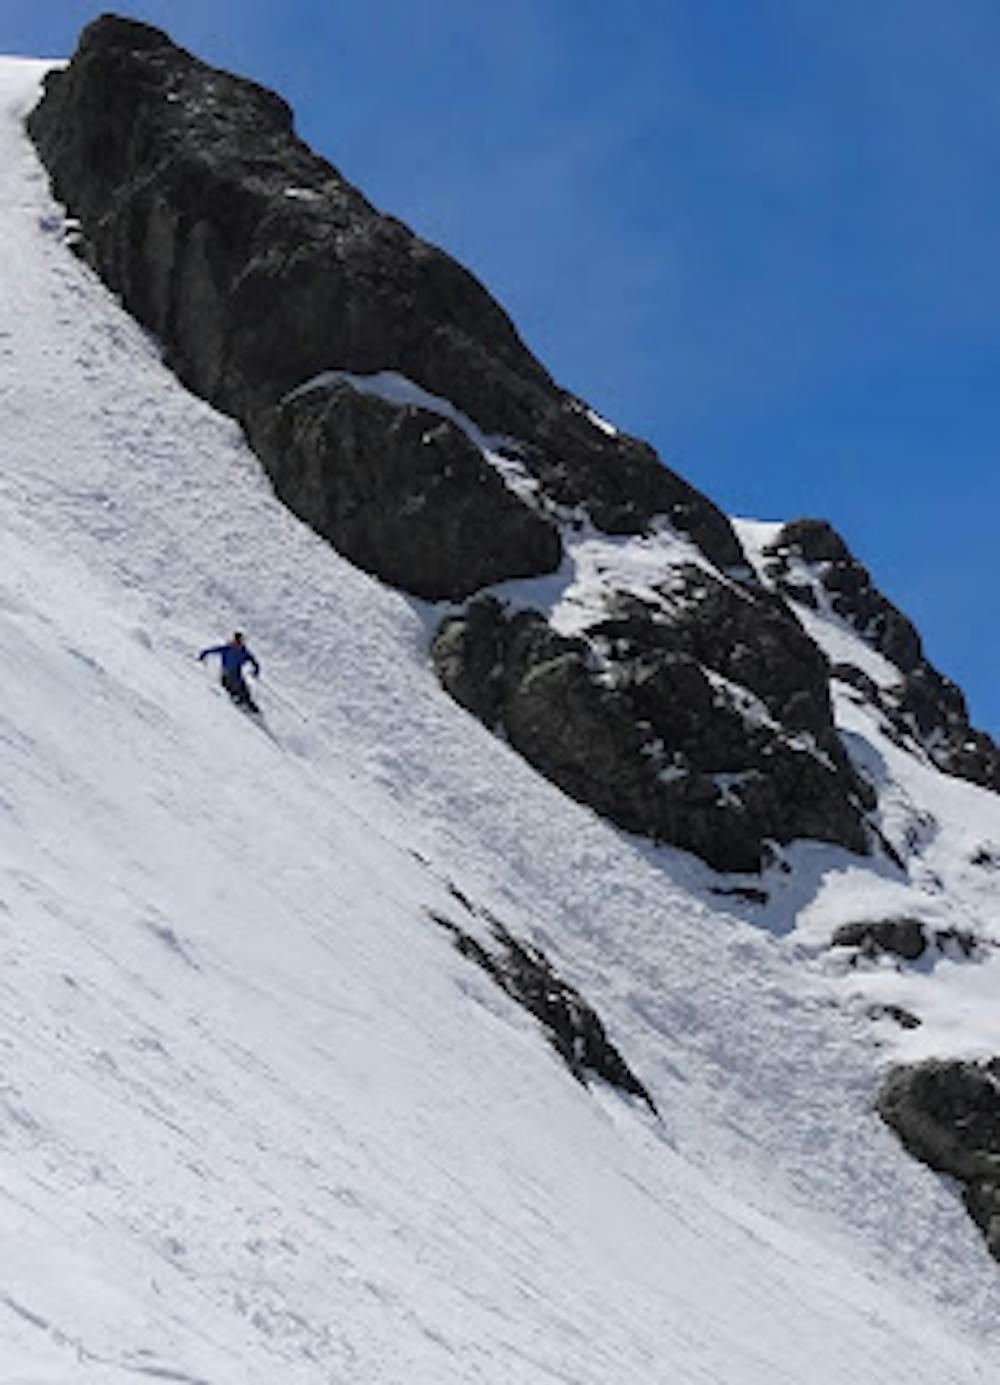 Brilliant spring skiing on the final section of the descent.